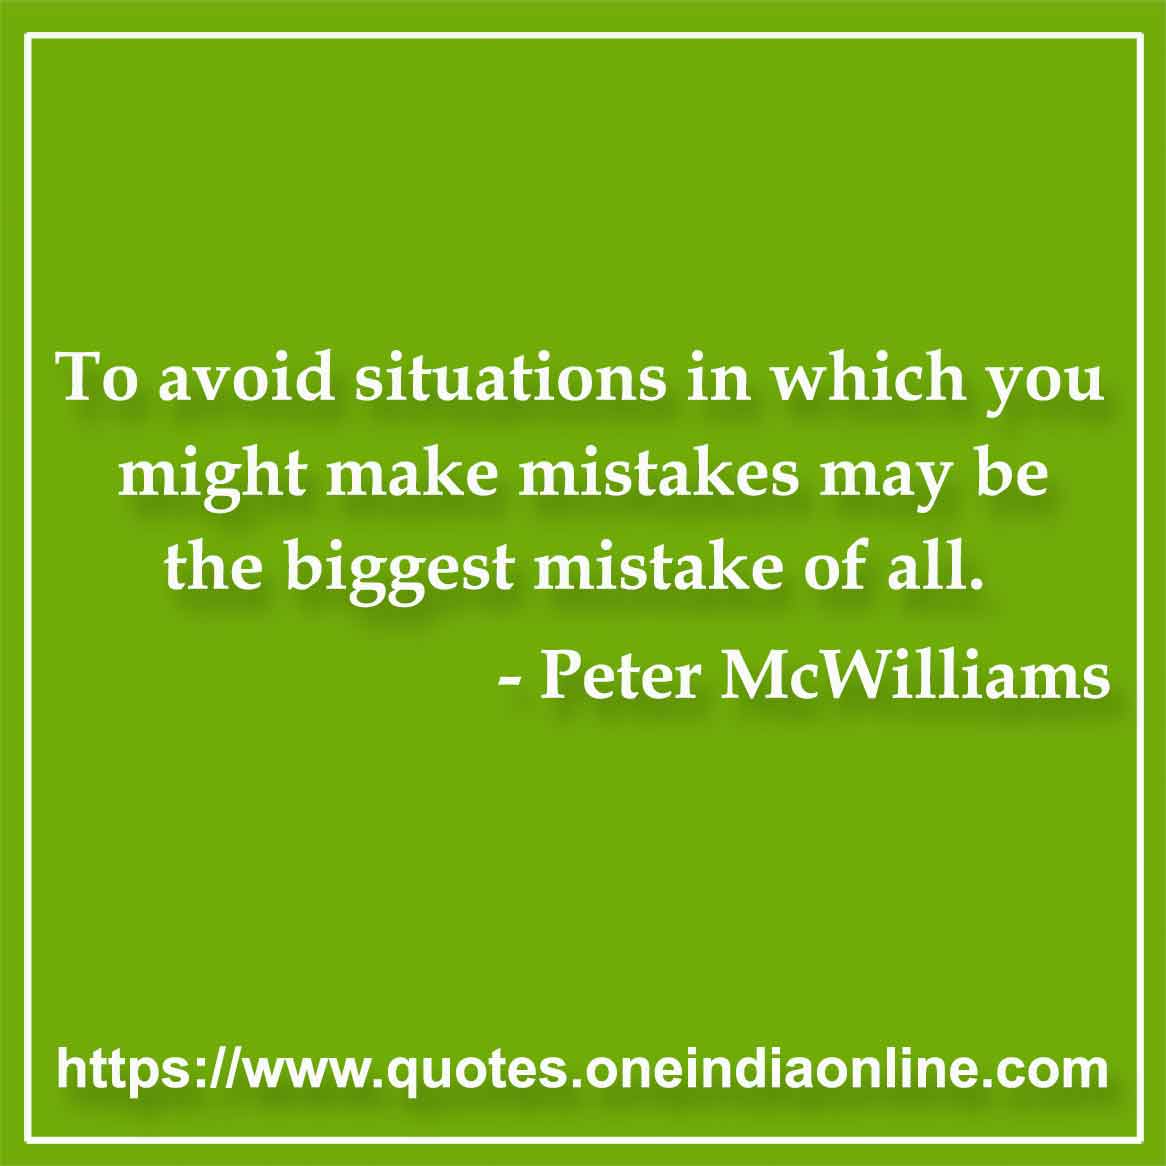 To avoid situations in which you might make mistakes may be the biggest mistake of all.

- Peter McWilliams Quotes